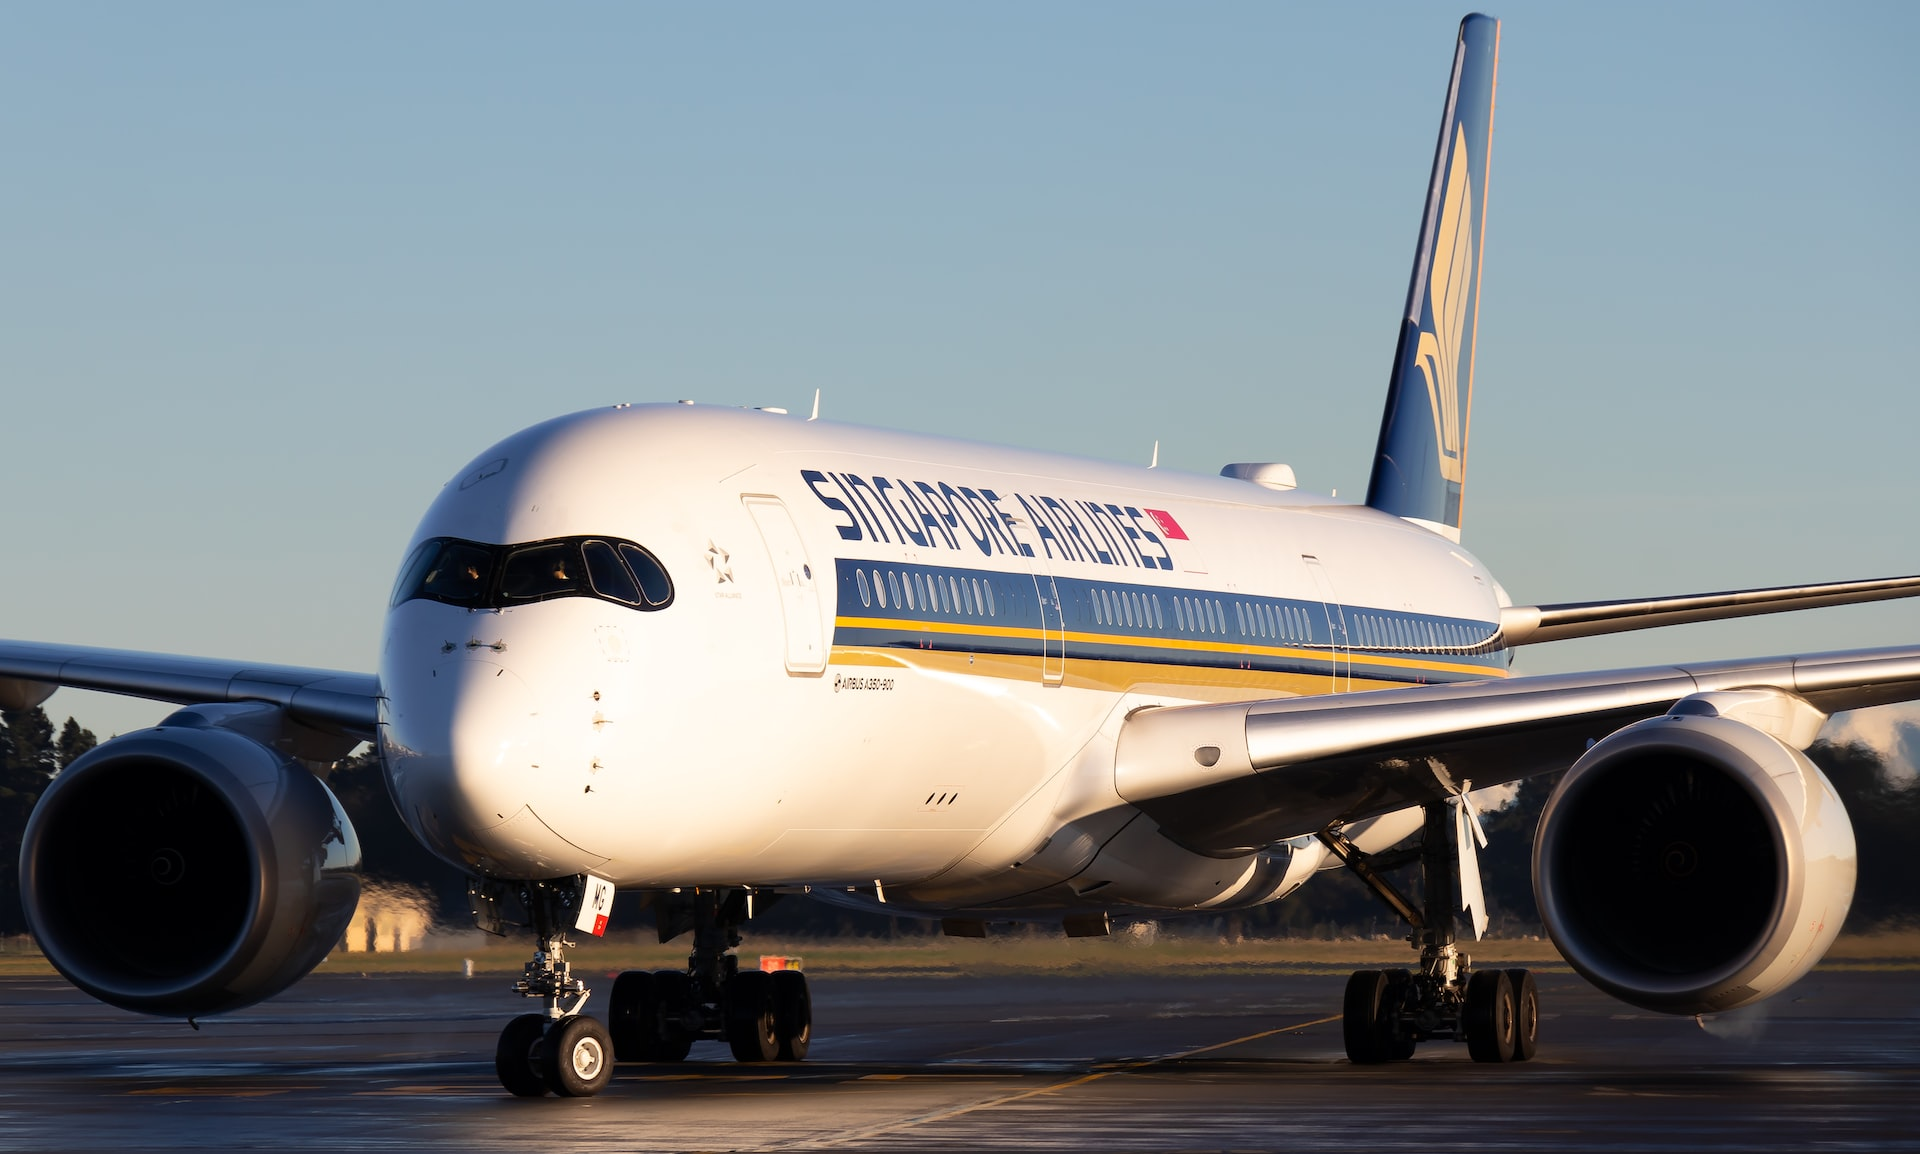 A Singapore Airlines Airbus A350 parked at an airport.